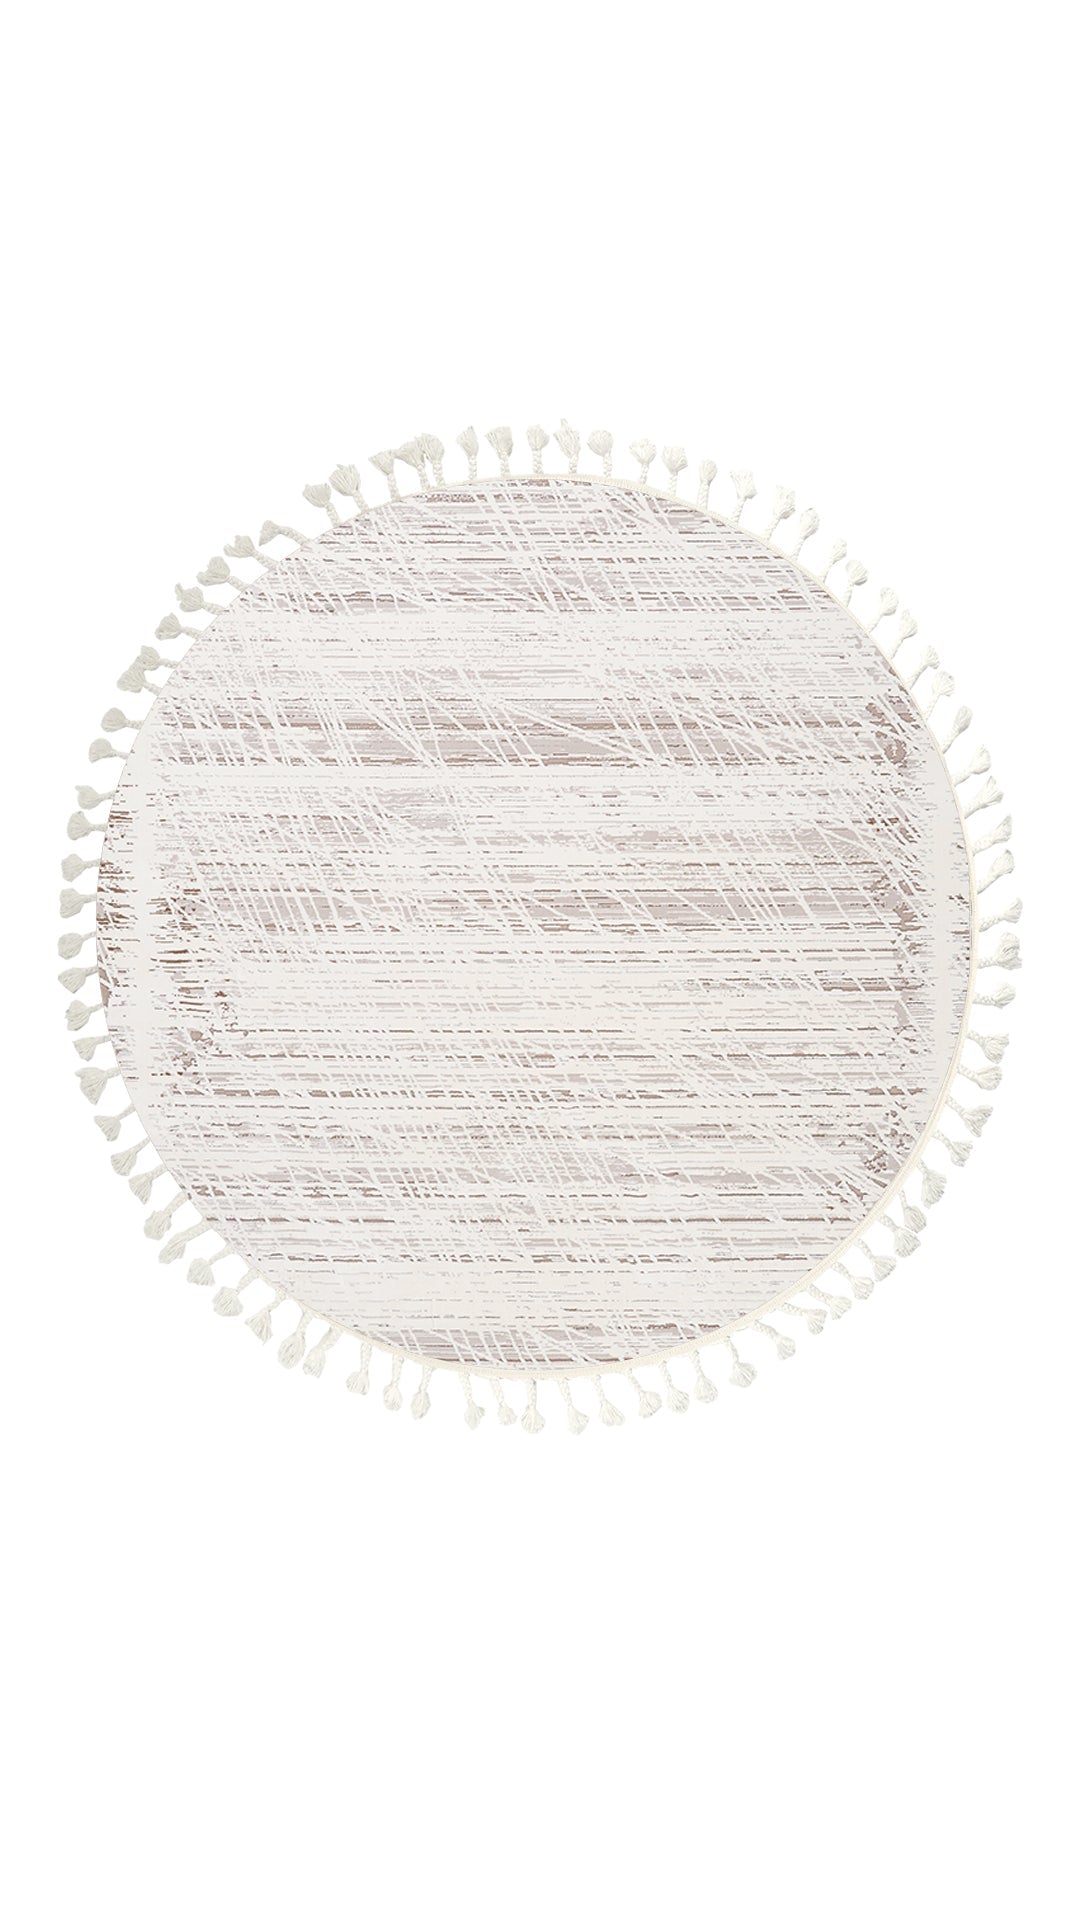 Dolce Vita Rug Otto 4301 French Living Room Round Rug